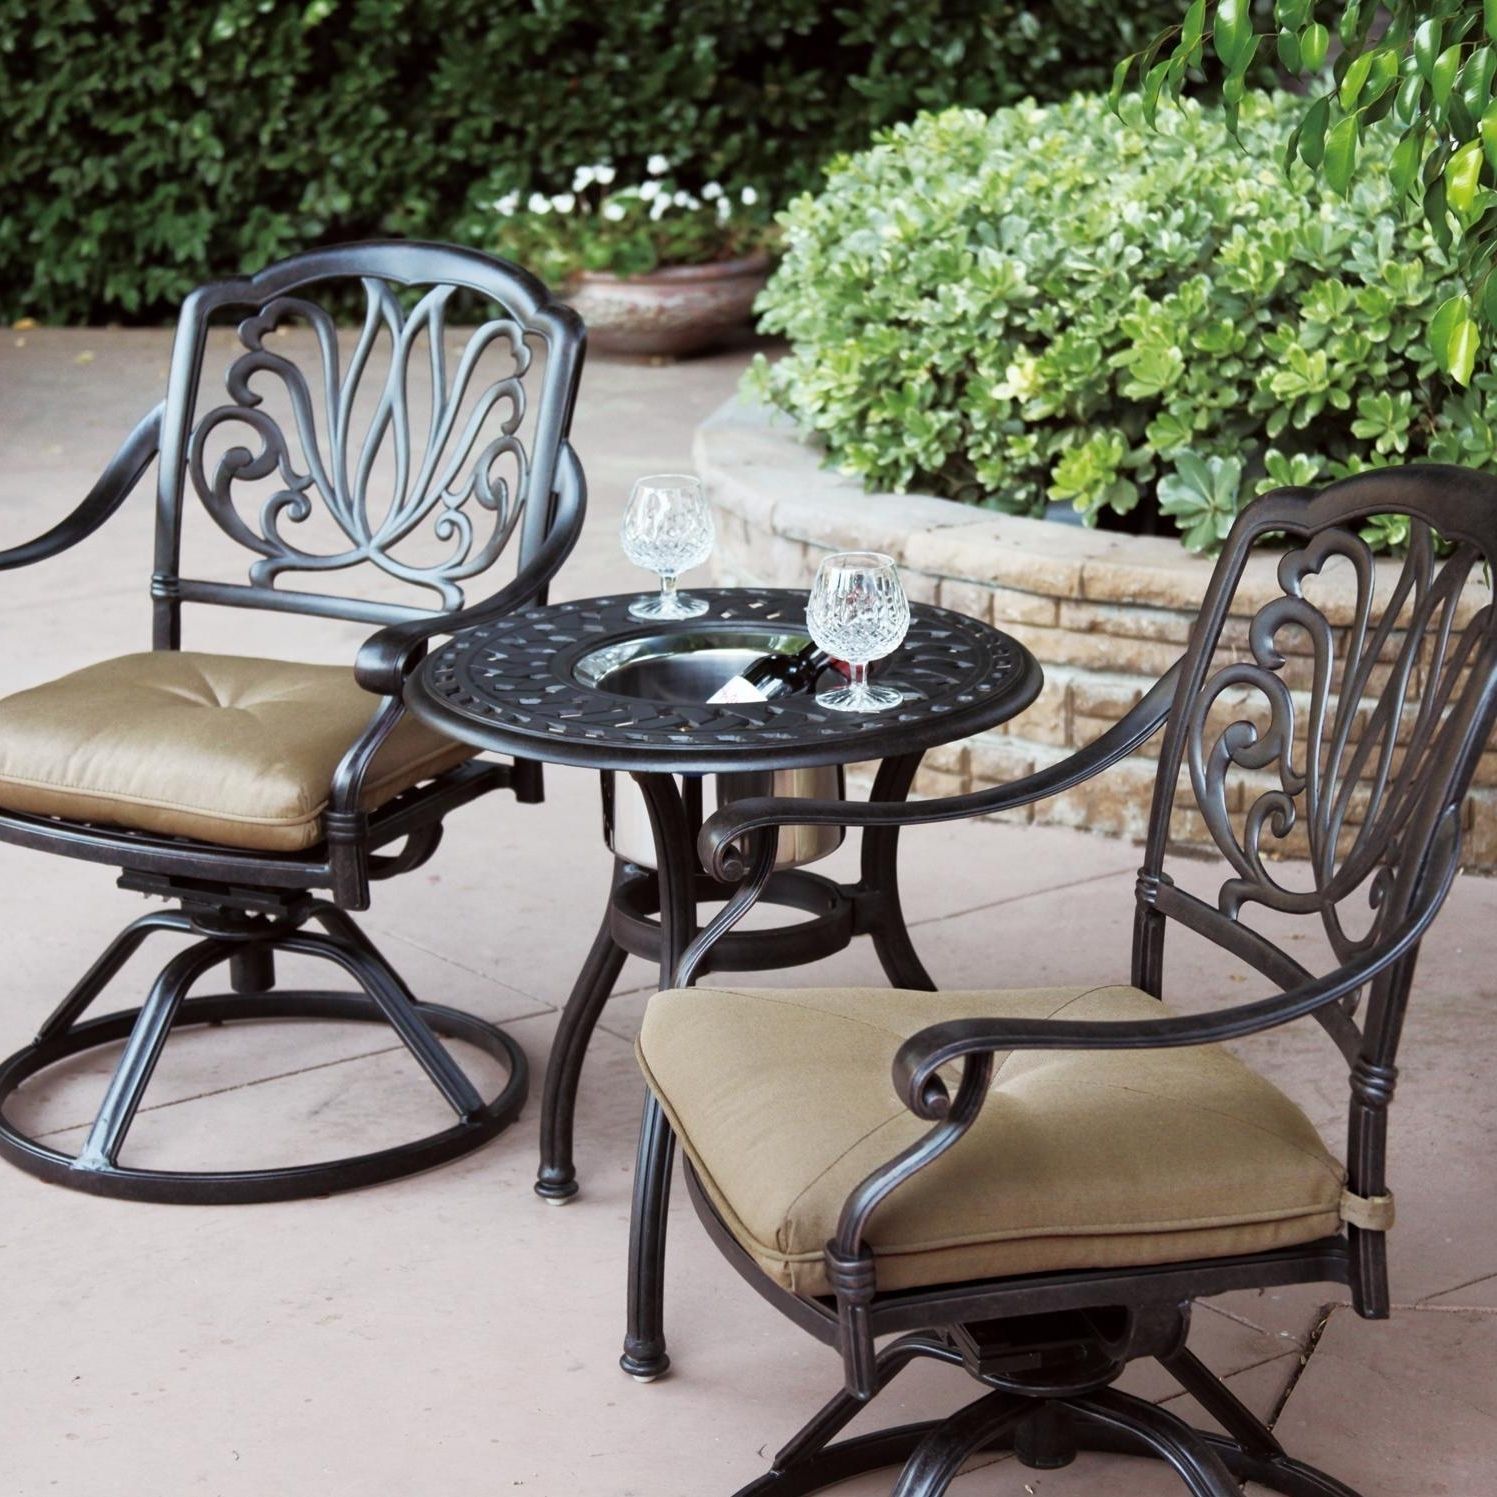 15 Collection of Wrought Iron Patio Rocking Chairs